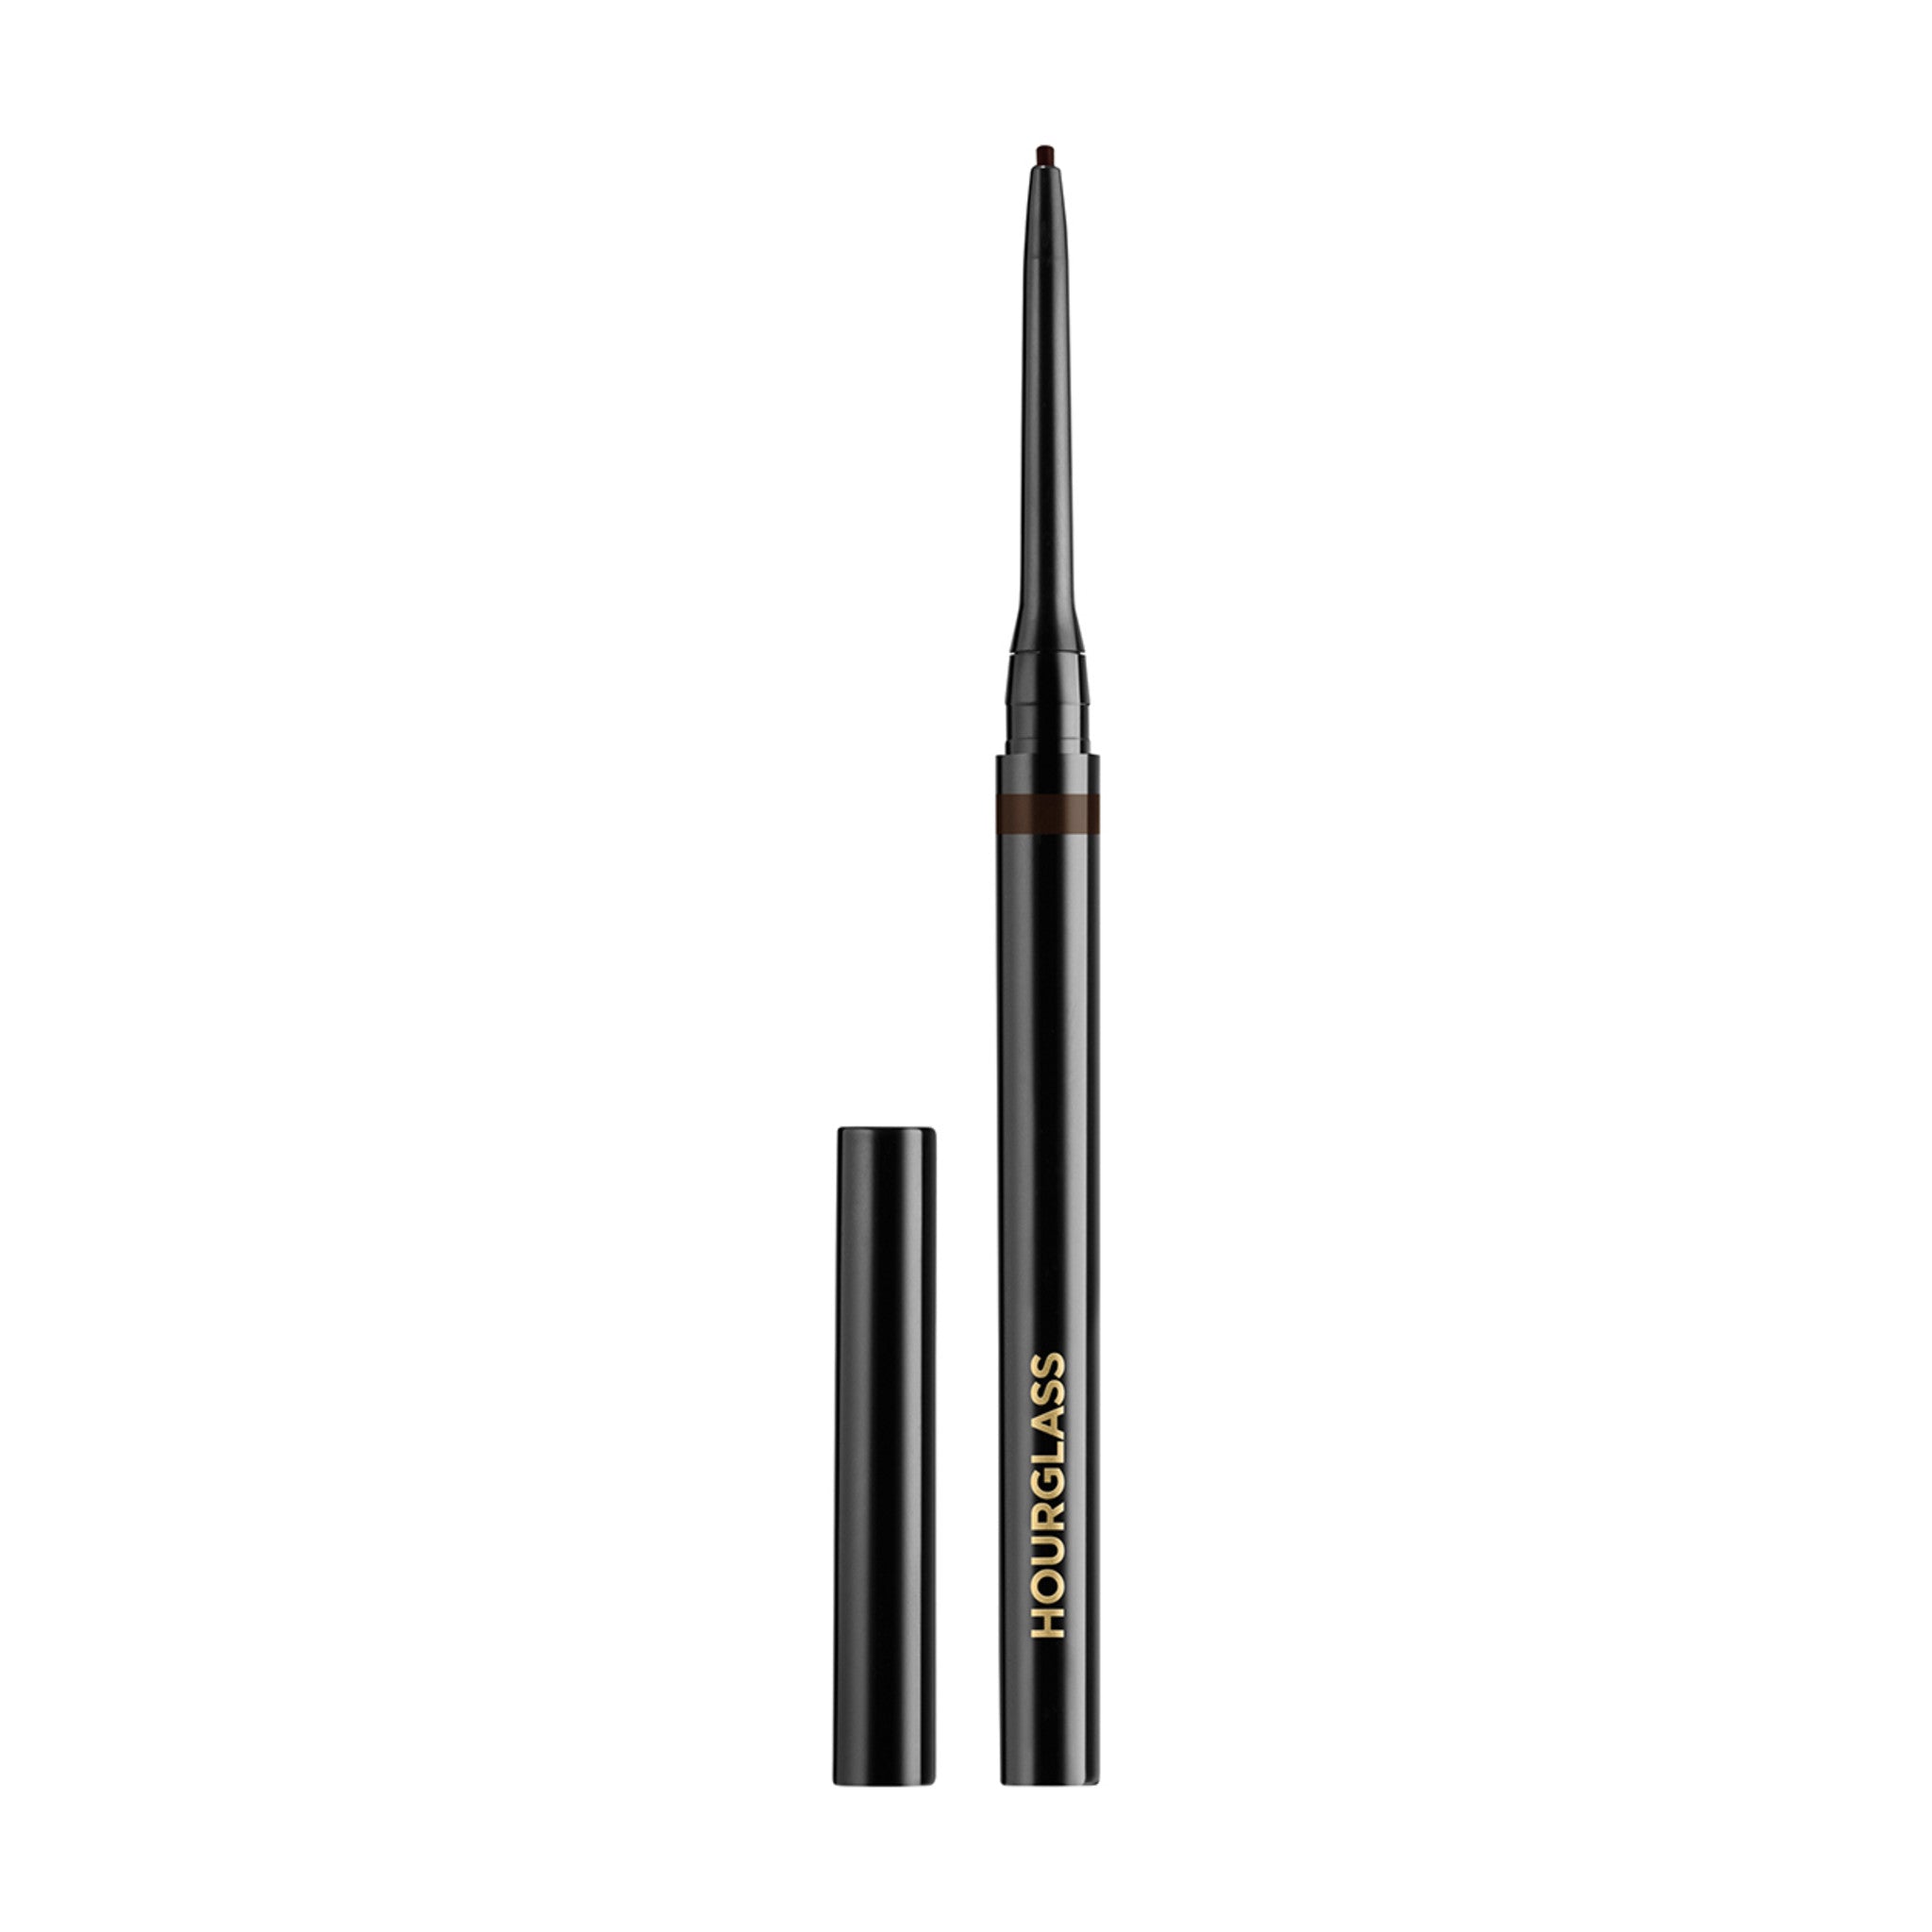 Hourglass 1.5MM Mechanical Gel Eye Liner Color/Shade variant: Canyon main image. This product is in the color black